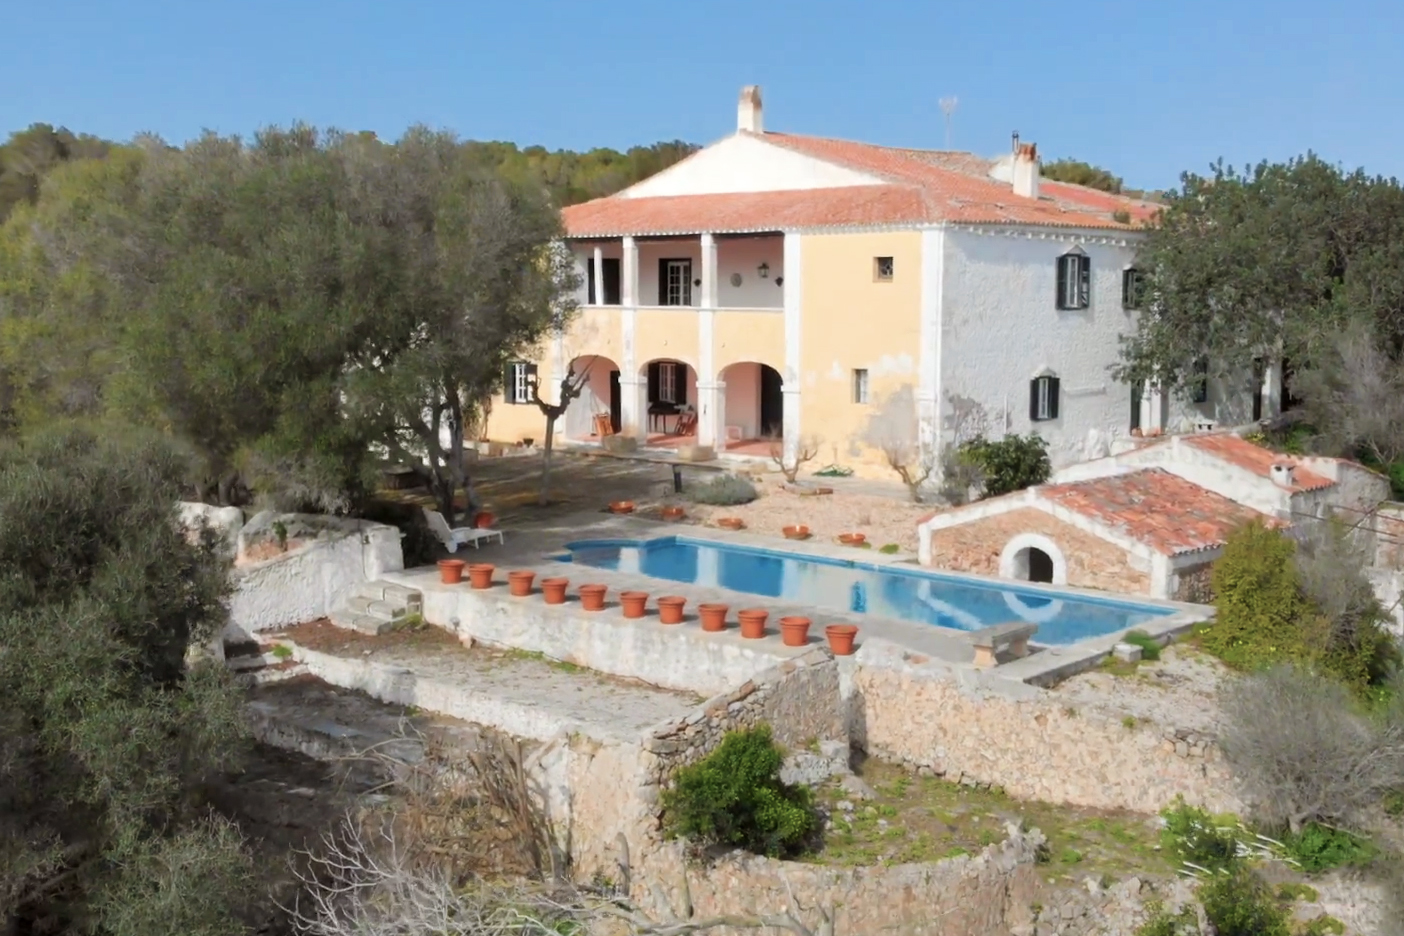 Large country estate with a period house in Menorca